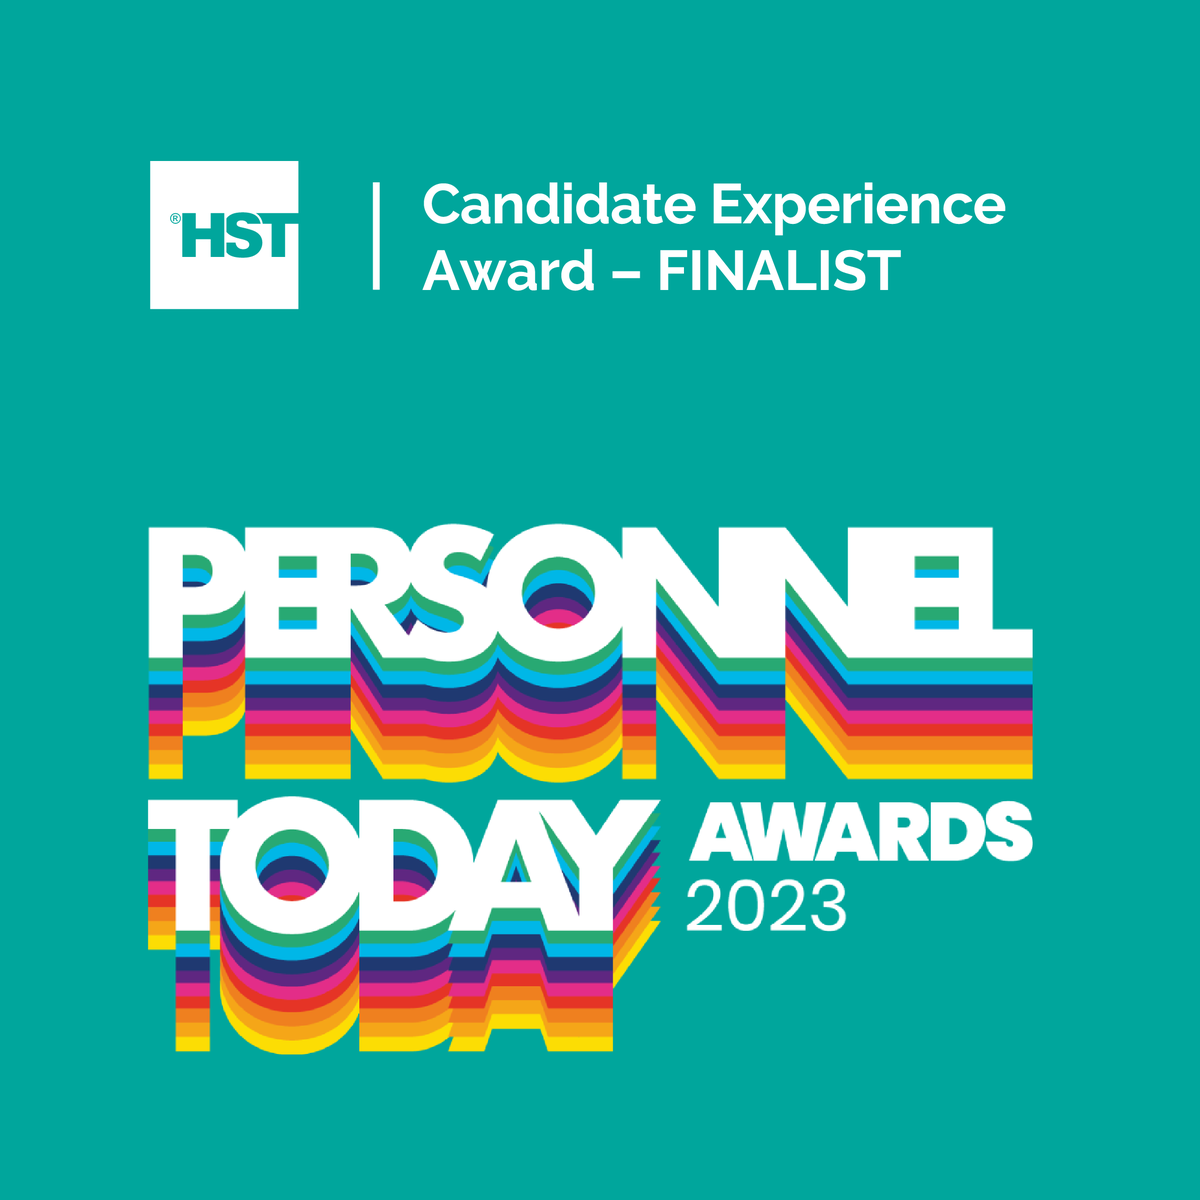 Our series of Social Care Recruitment Open Days on behalf of the Southern Health and Social Care Trust has been shortlisted as a FINALIST for Best Candidate Experience. Congratulations to all involved! #PTAwards